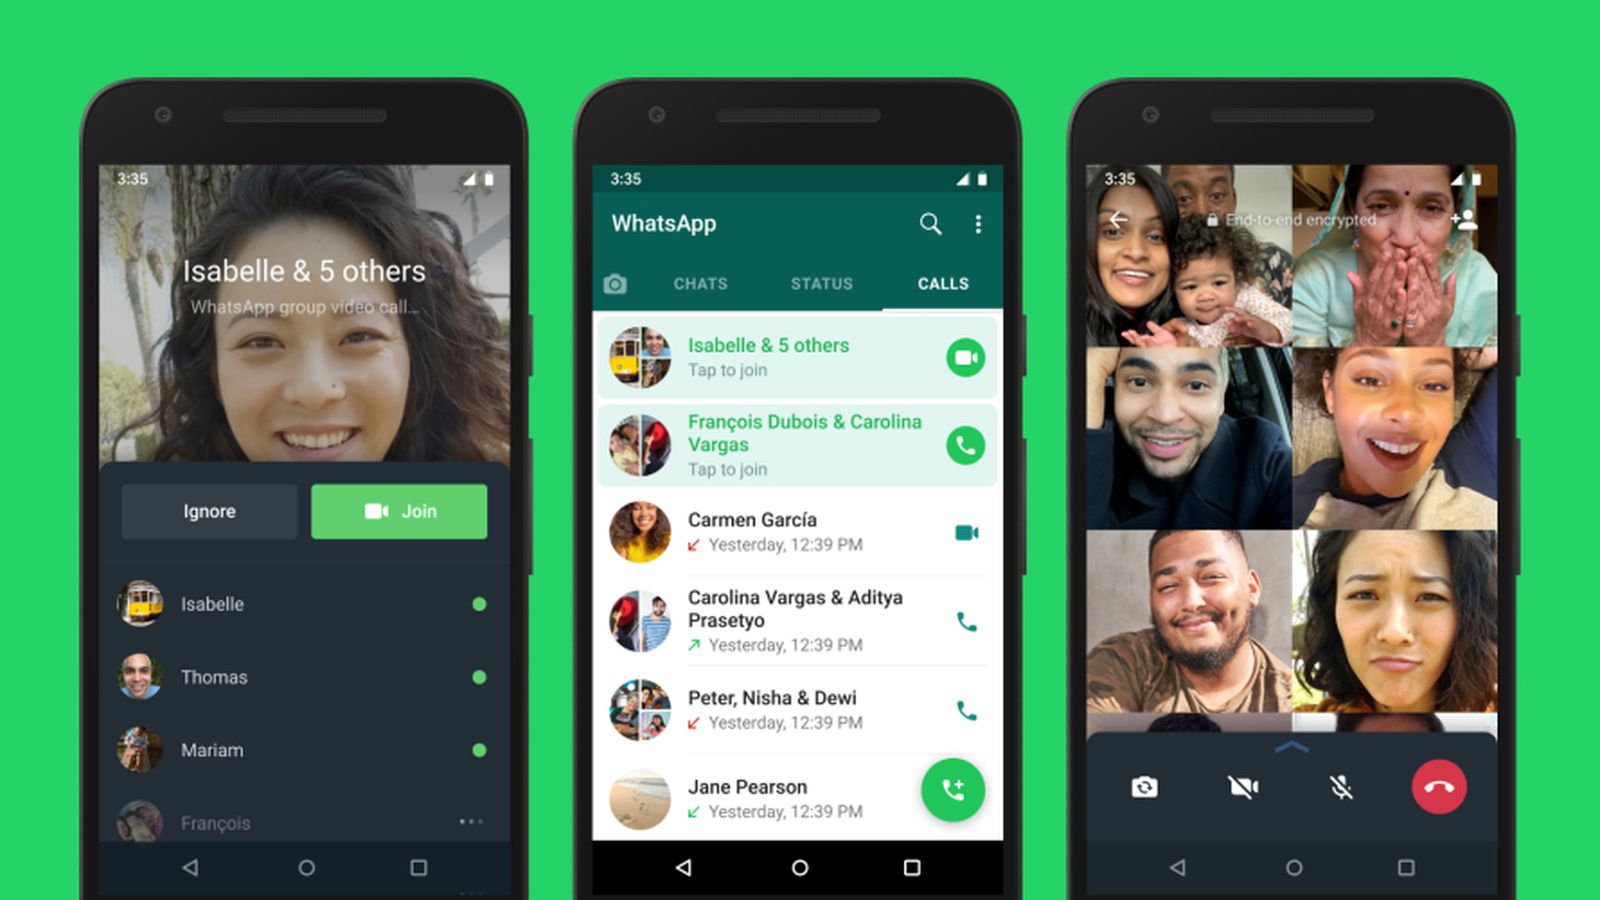 The new WhatsApp button will allow you to join group calls directly